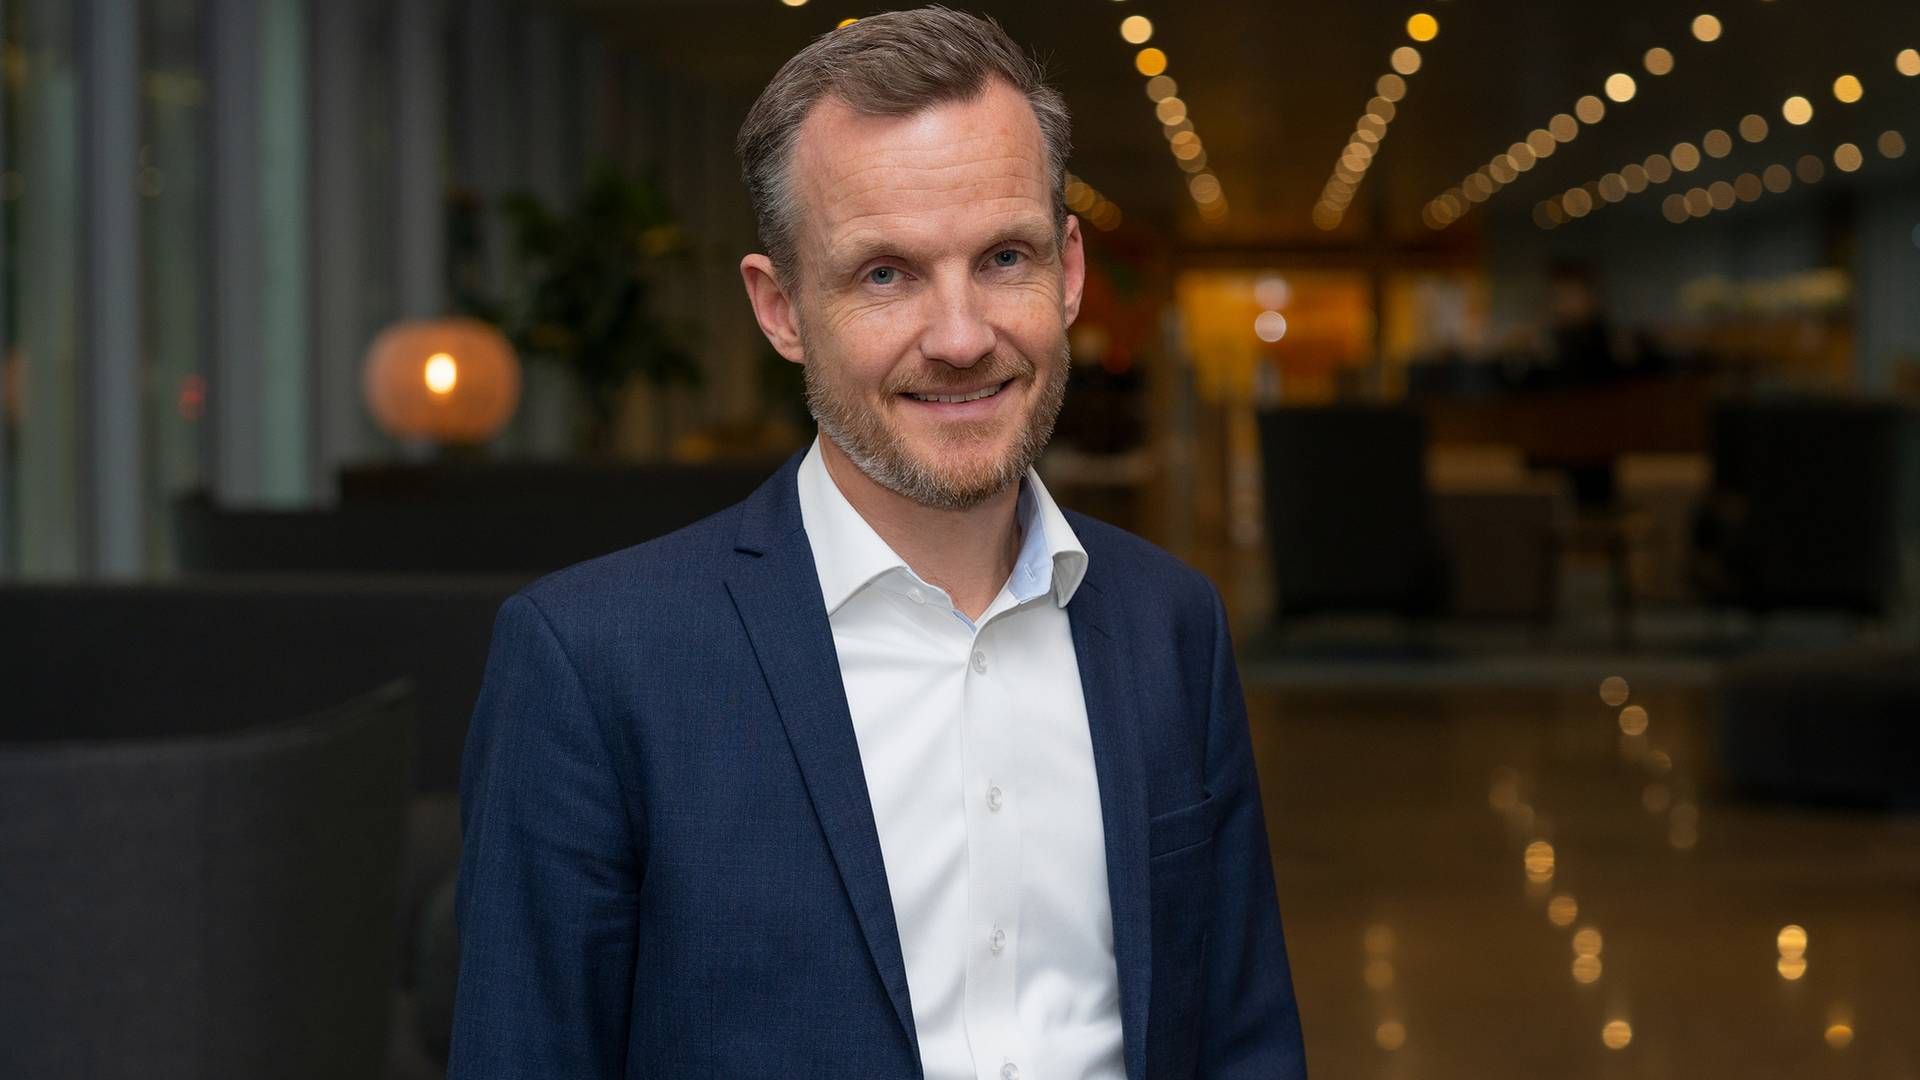 Maersk is disappointed that oil companies are holding back on producing green marine fuels, says Maersk's Head of Decarbonization, Morten Bo Christiansen. | Photo: Maersk PR